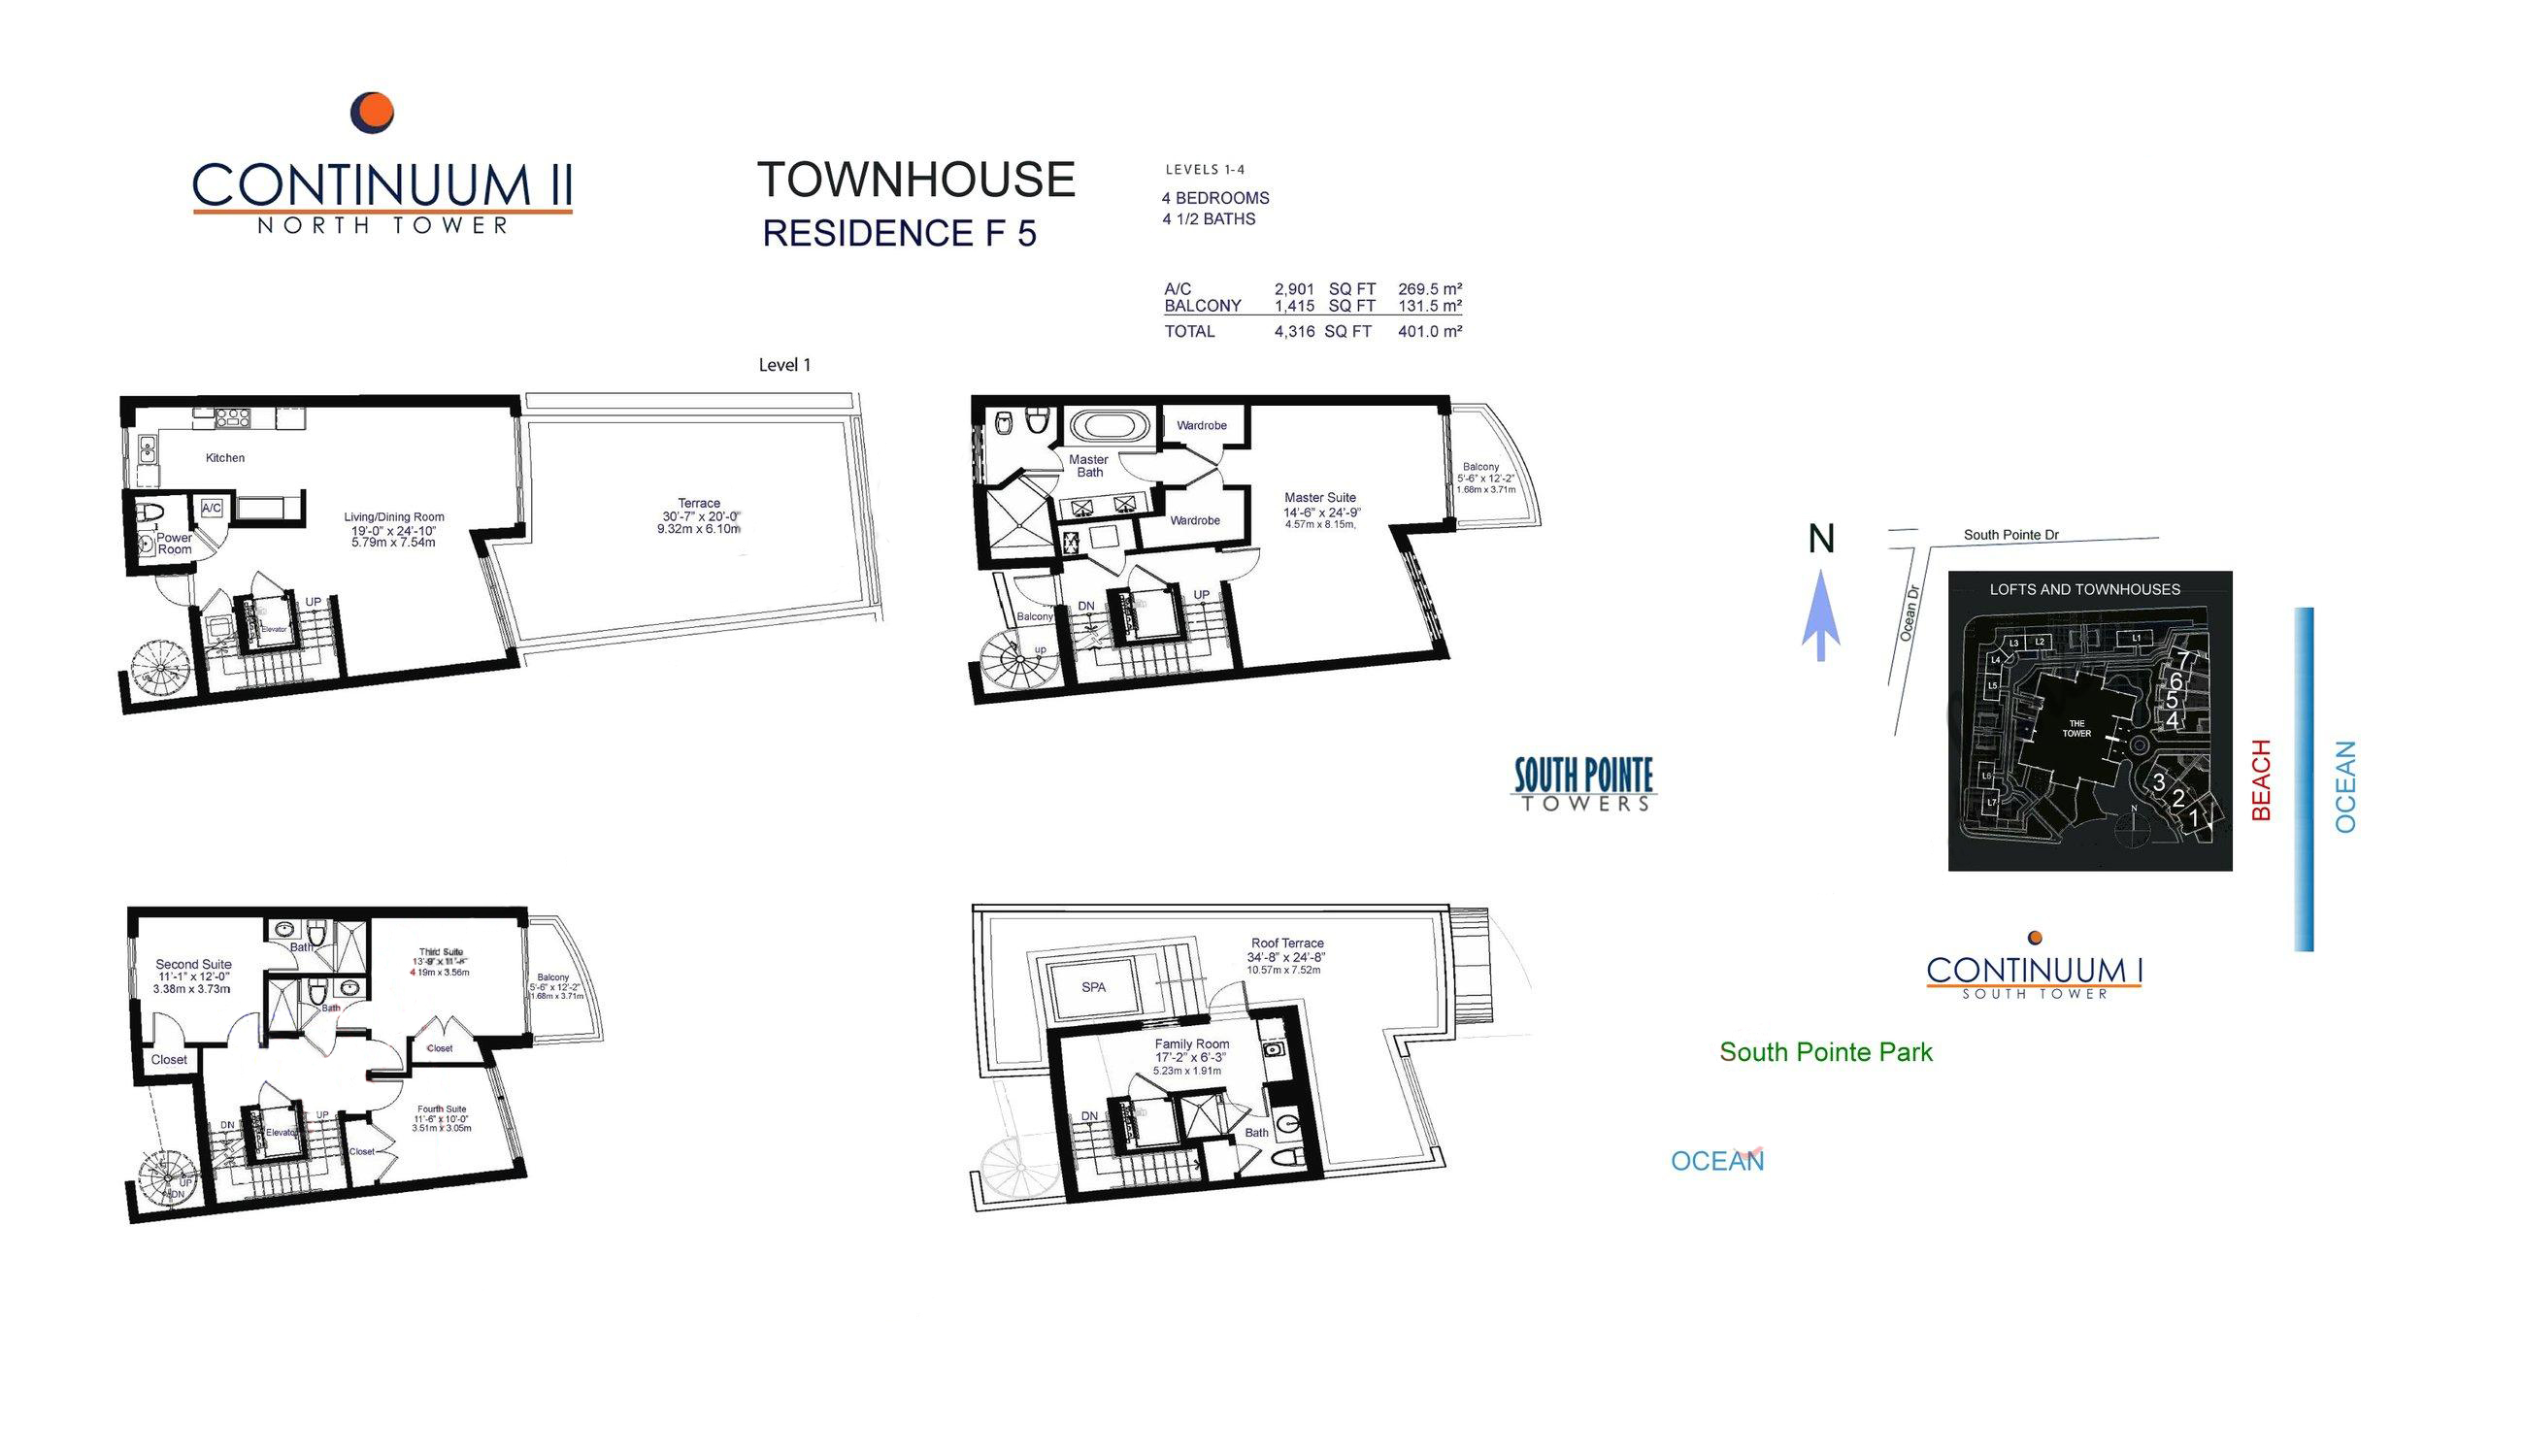 Continuum North Tower Townhouse Residence F5